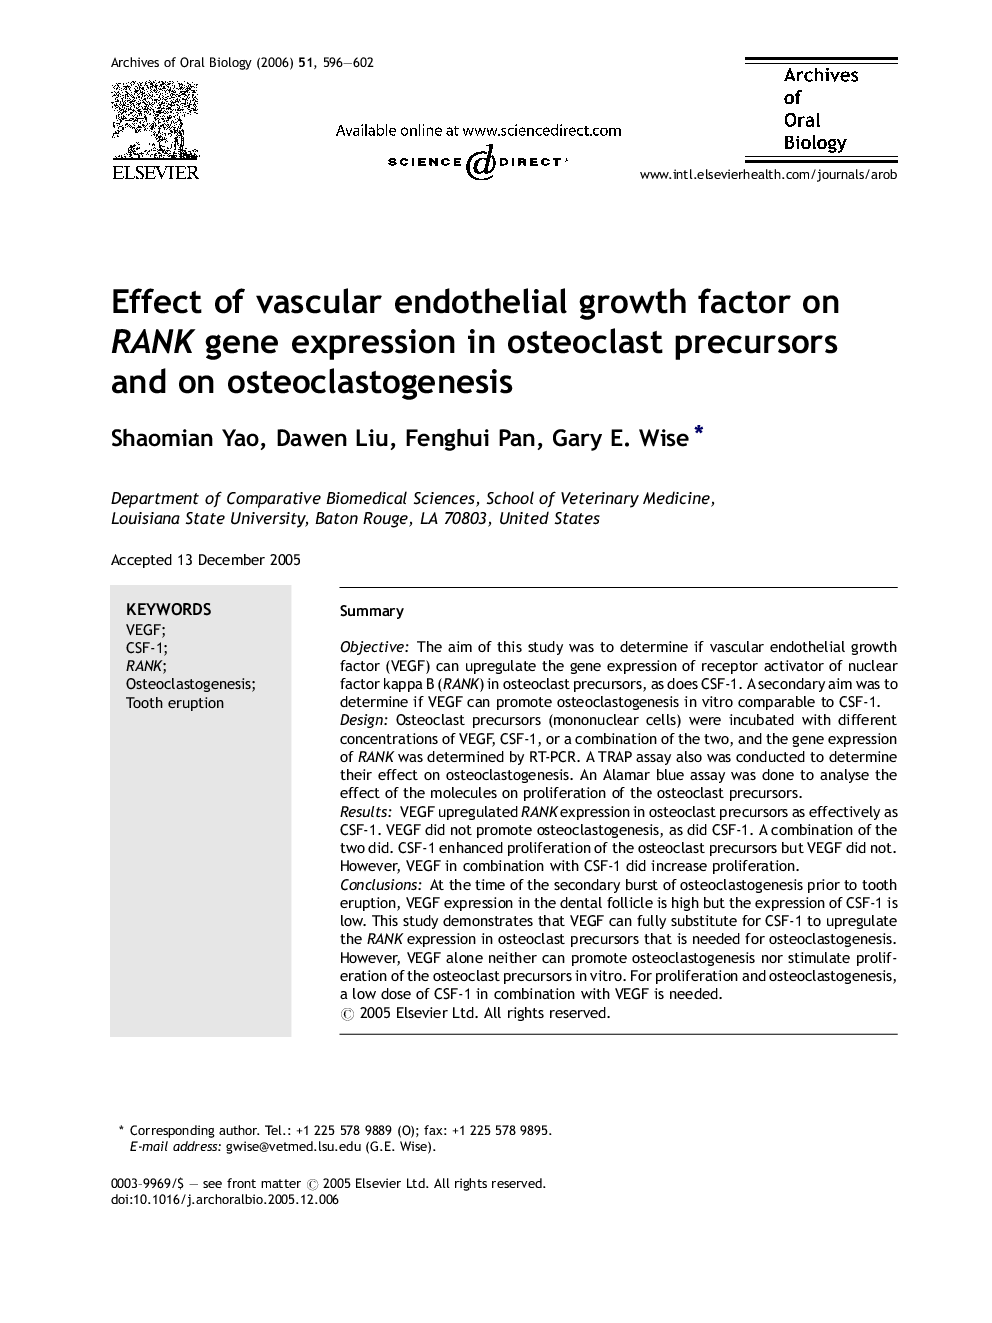 Effect of vascular endothelial growth factor on RANK gene expression in osteoclast precursors and on osteoclastogenesis